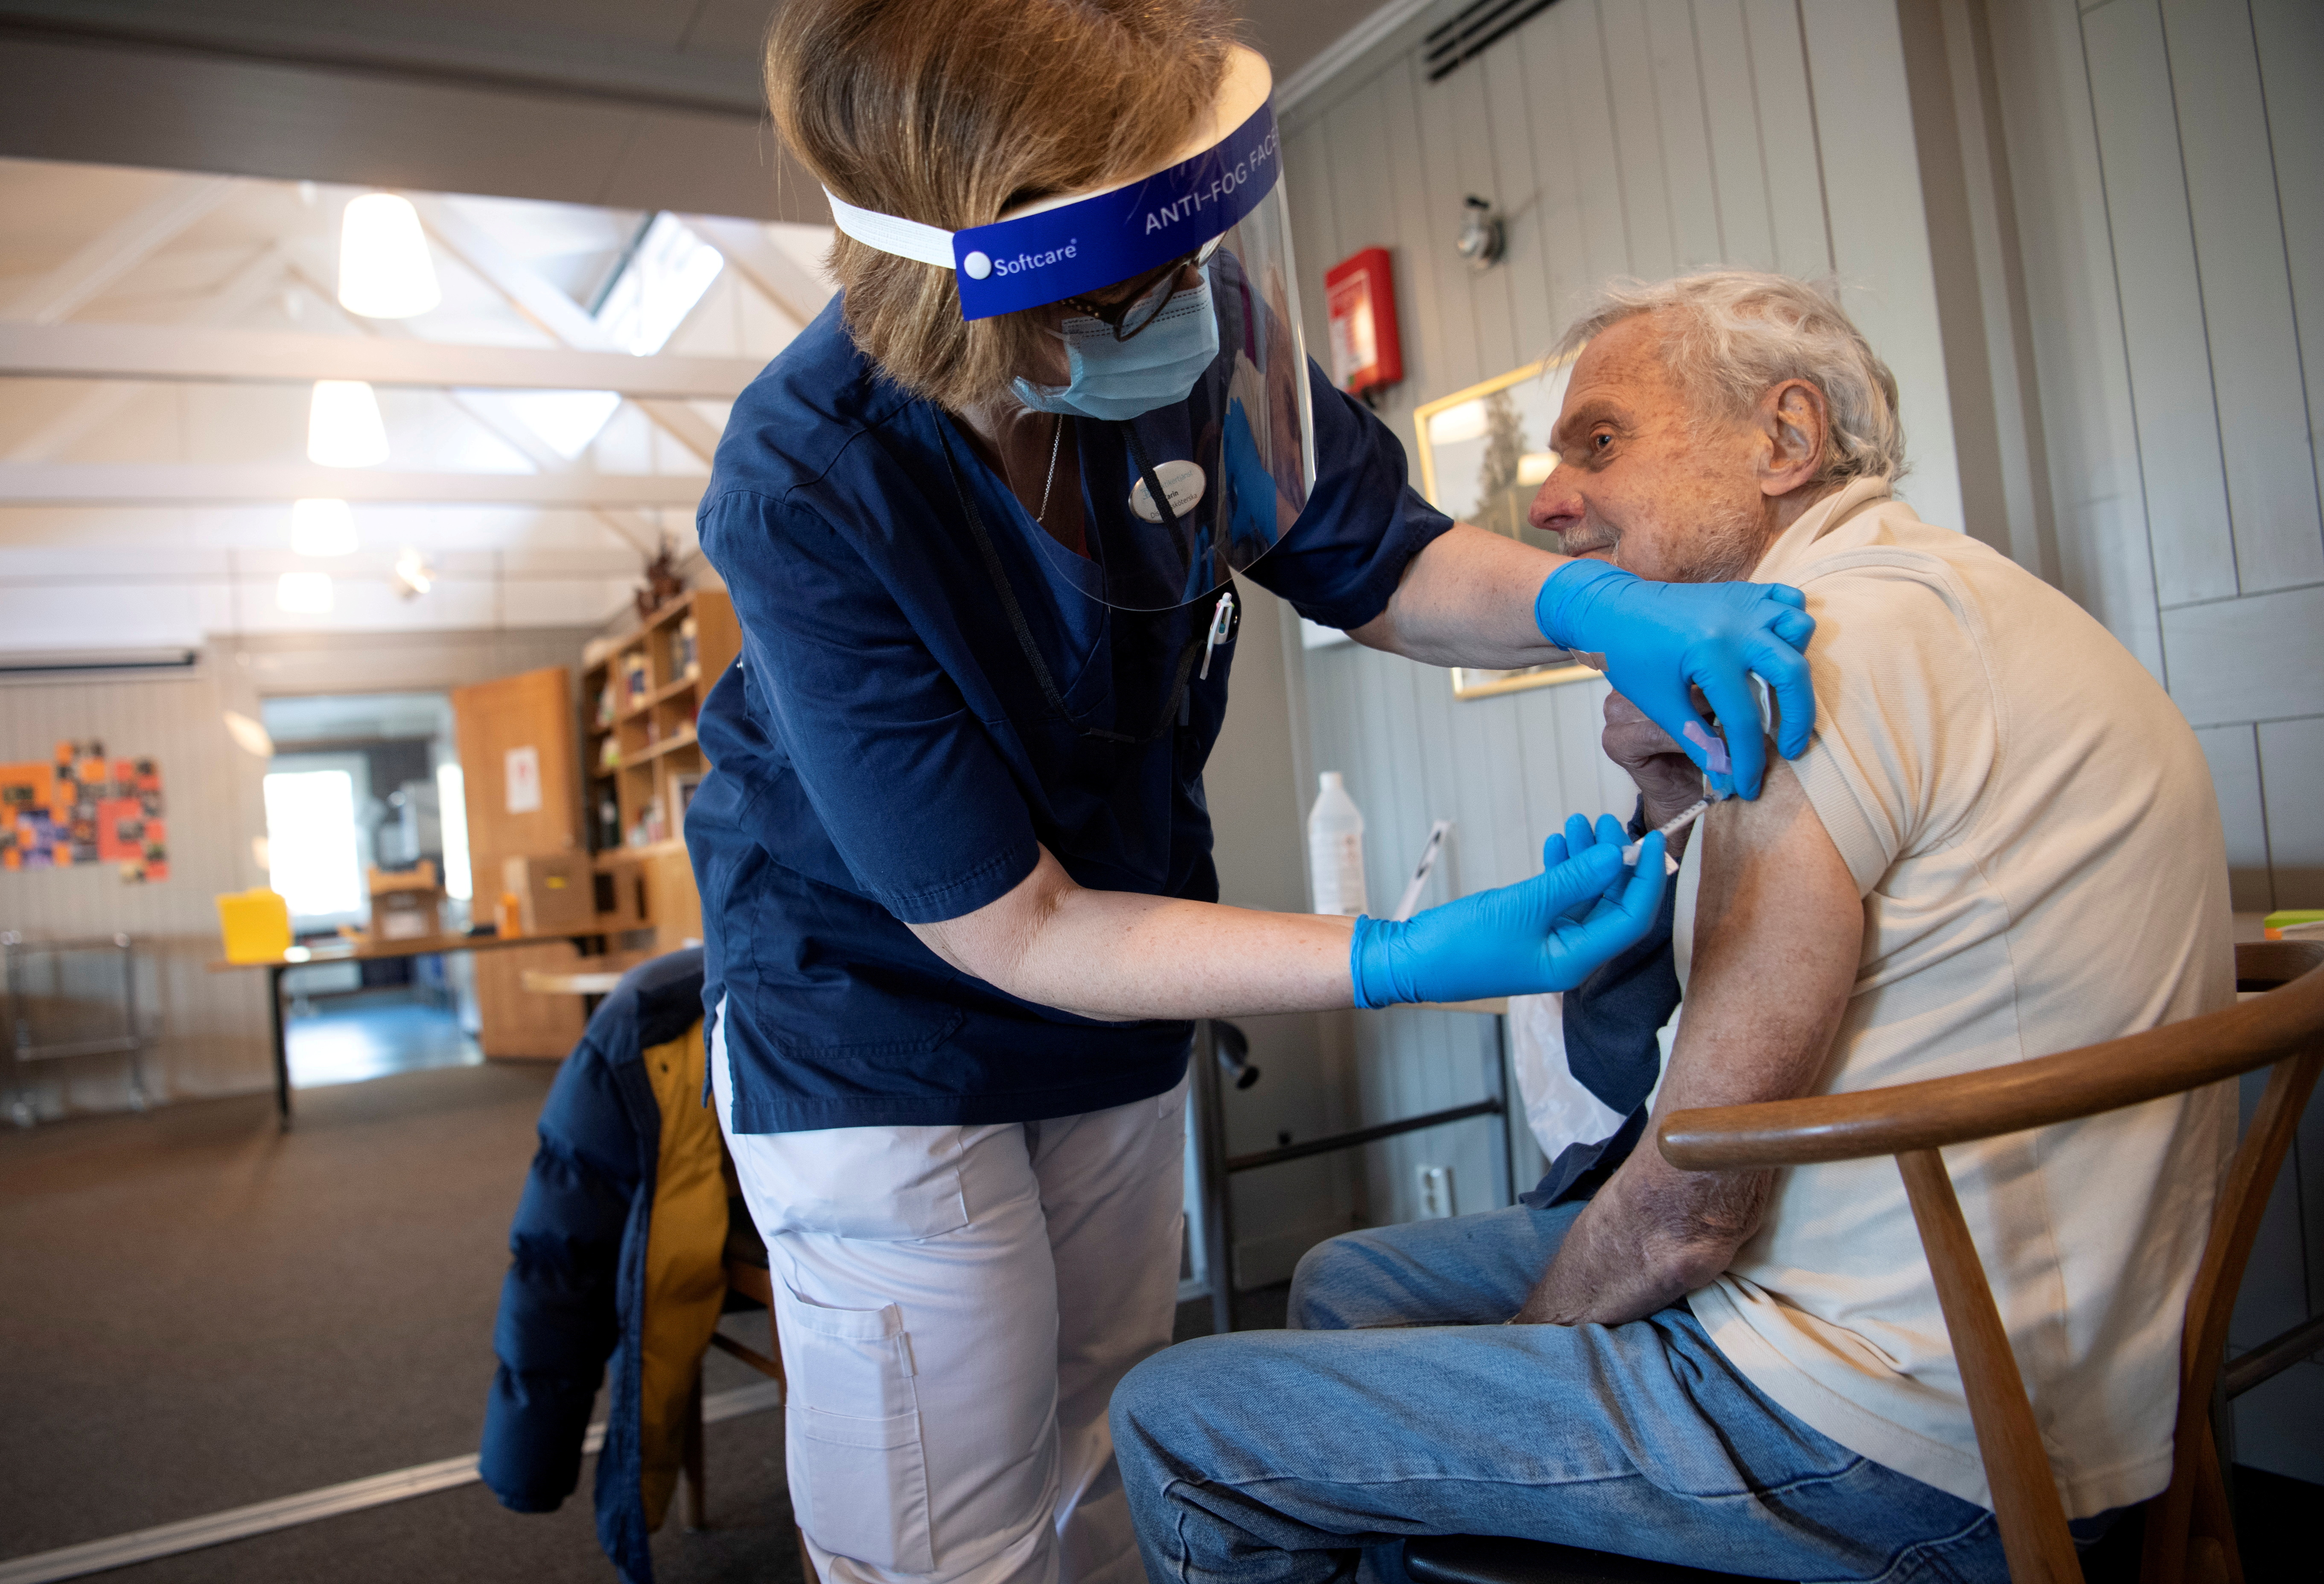 A health worker vaccinates an elderly person with Pfizer's COVID-19 vaccine at a temporary vaccination clinic in a church in Sollentuna, north of Stockholm, Sweden March 2, 2021. Fredrik Sandberg/TT News Agency/via REUTERS  